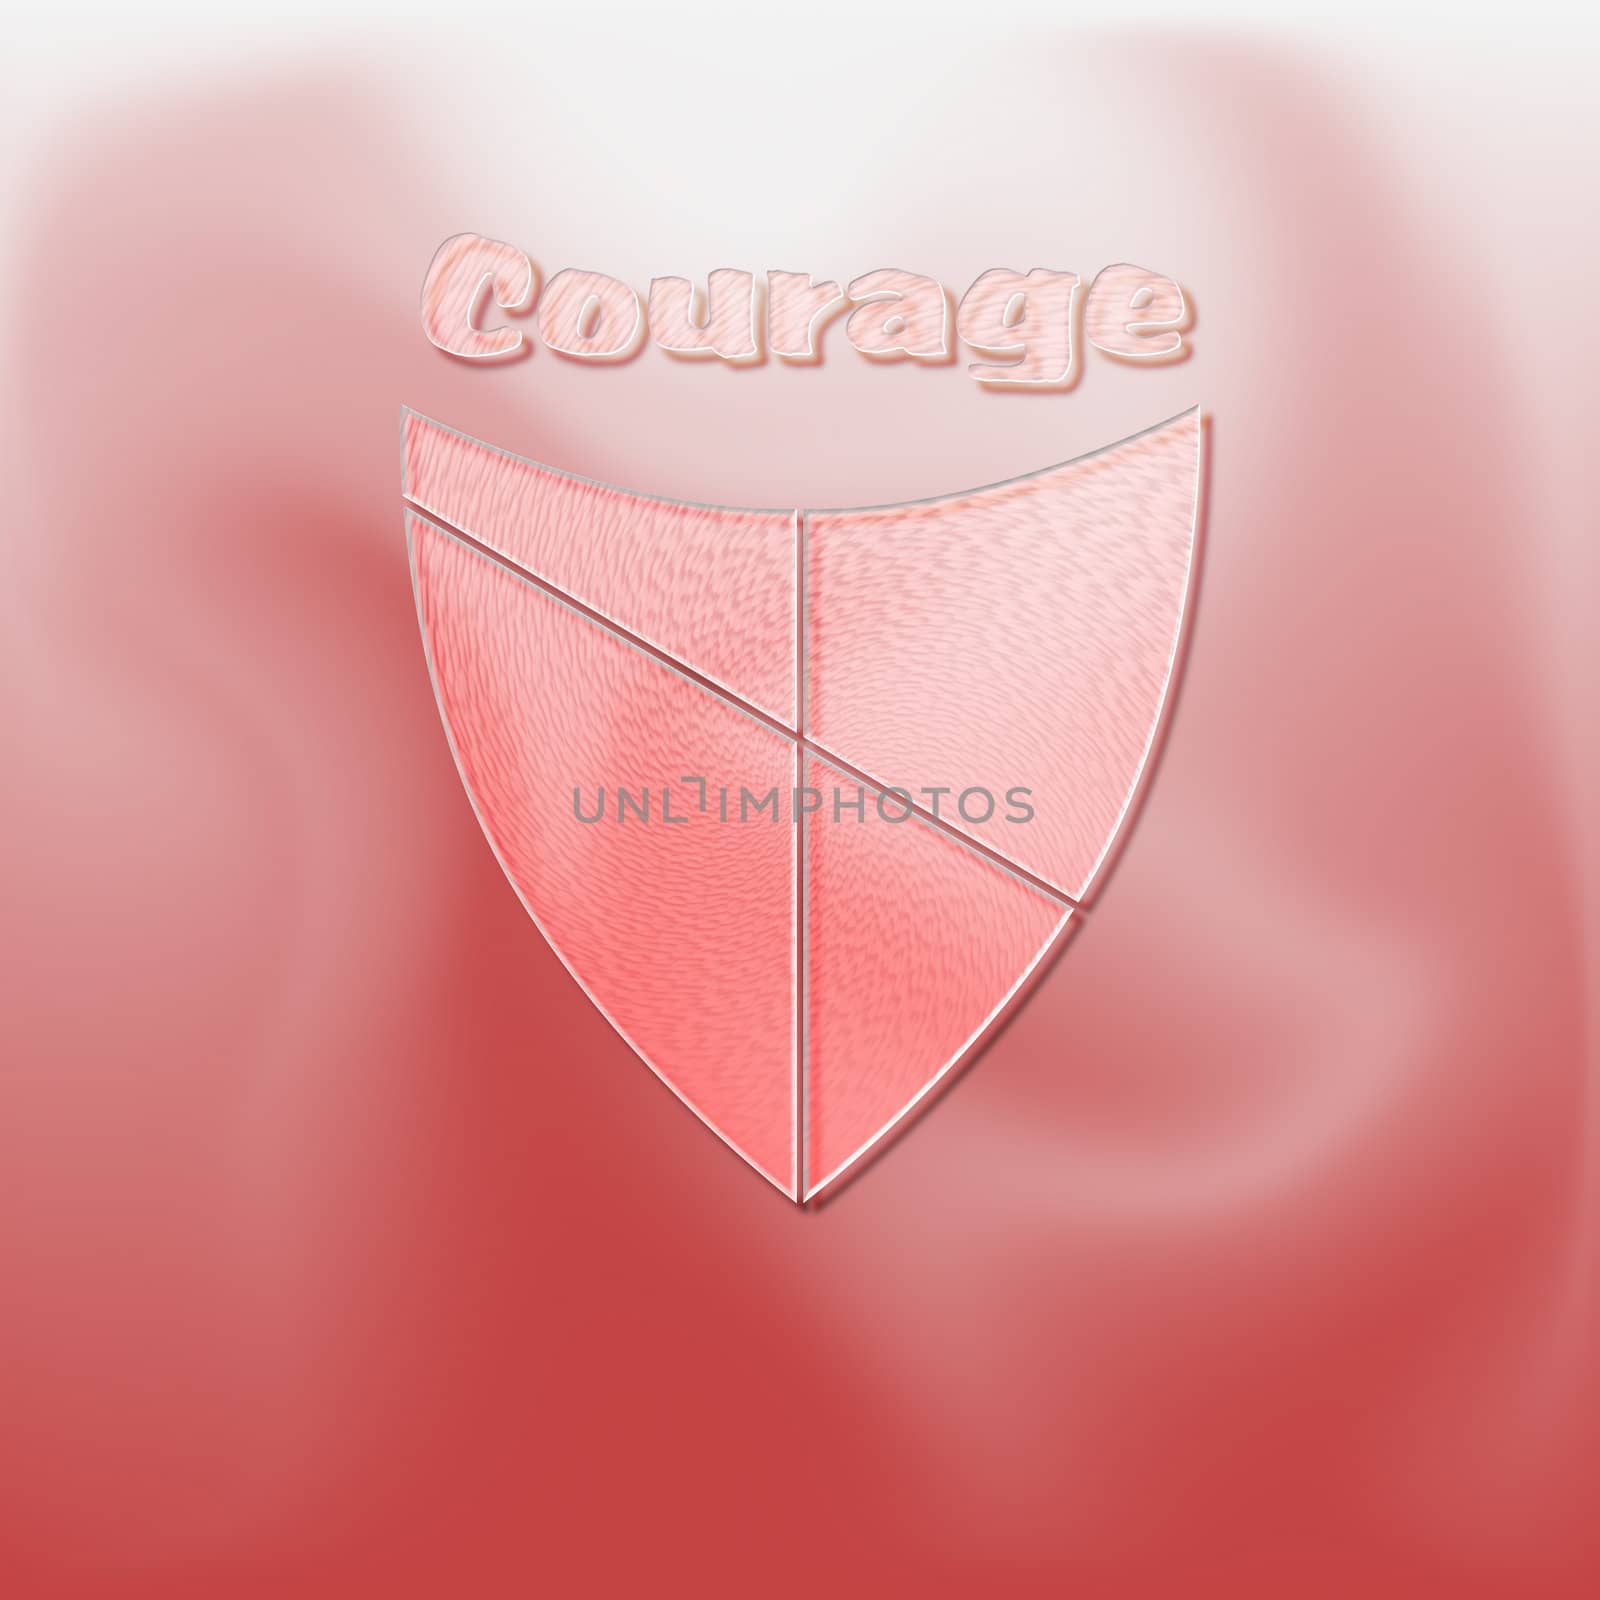 The concept of courage illustrated with a shield on red - a raster illustration.